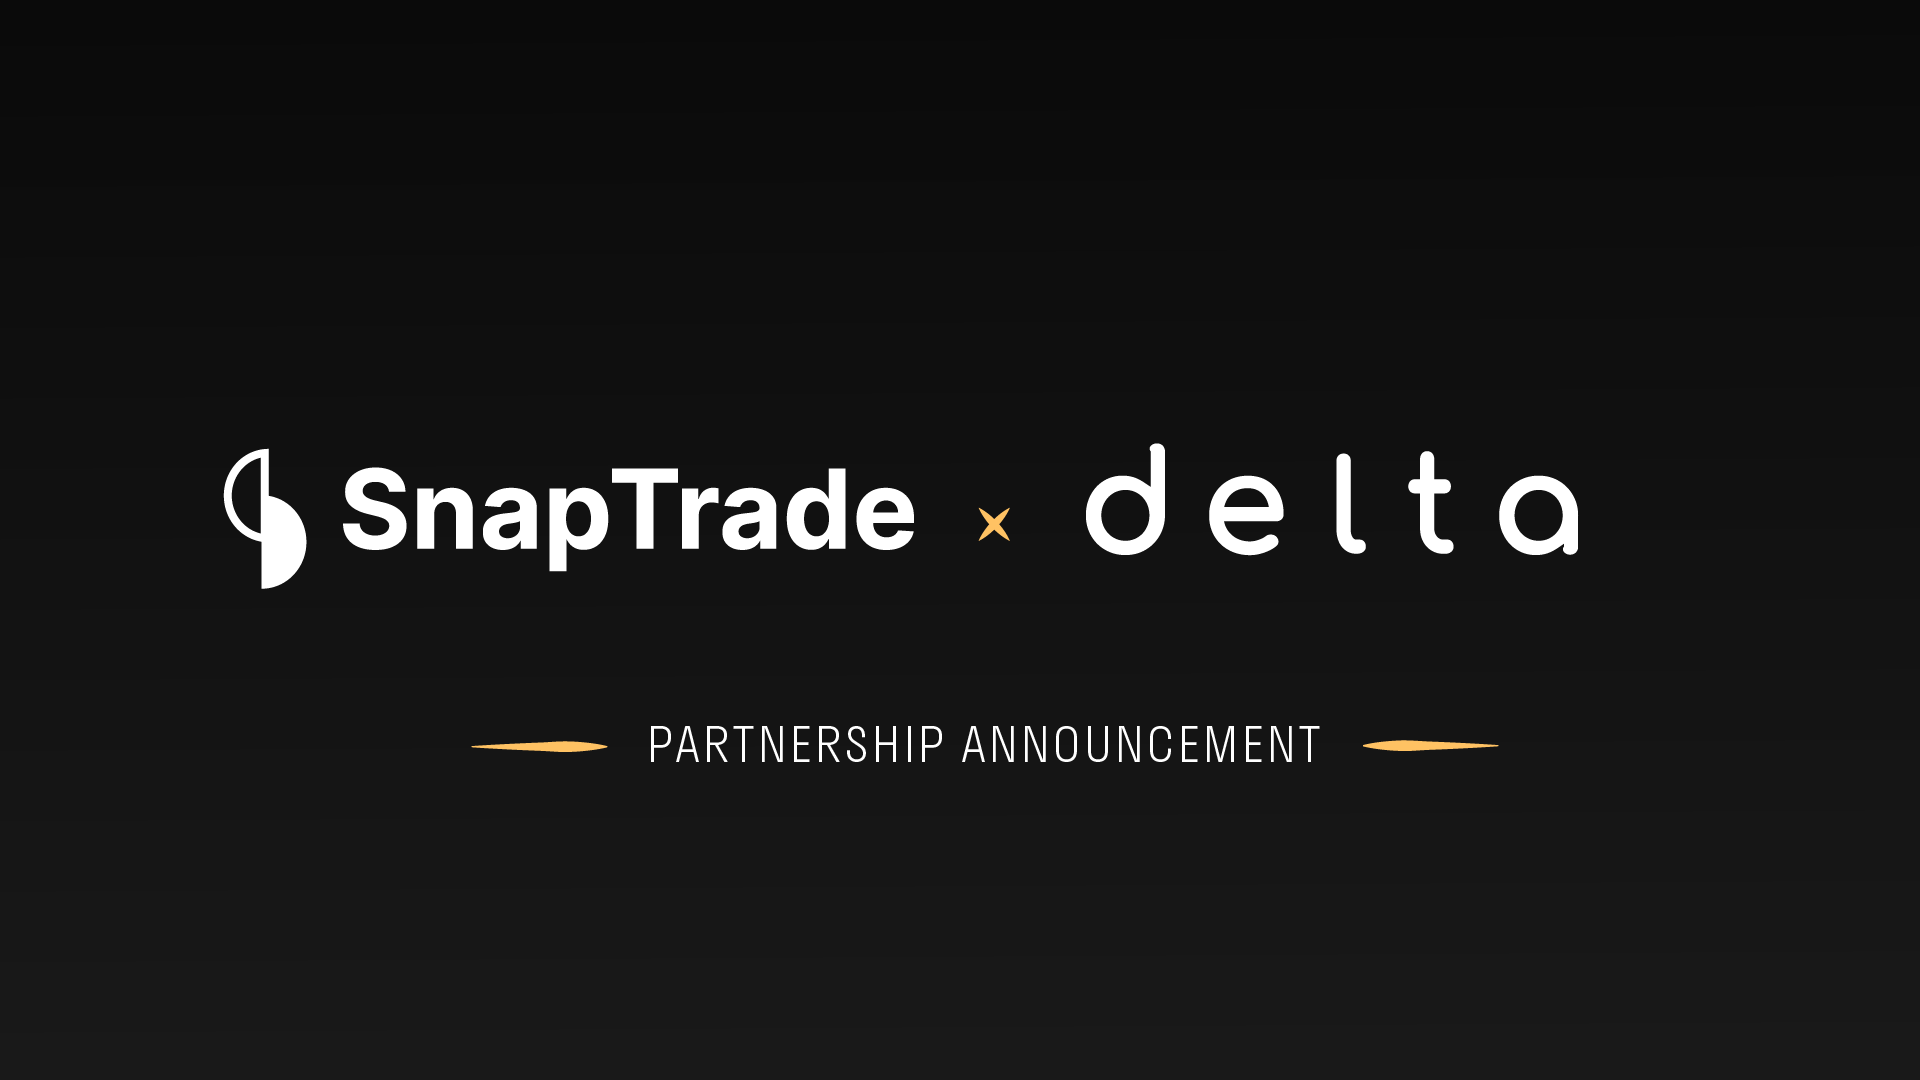 SnapTrade partners with Delta